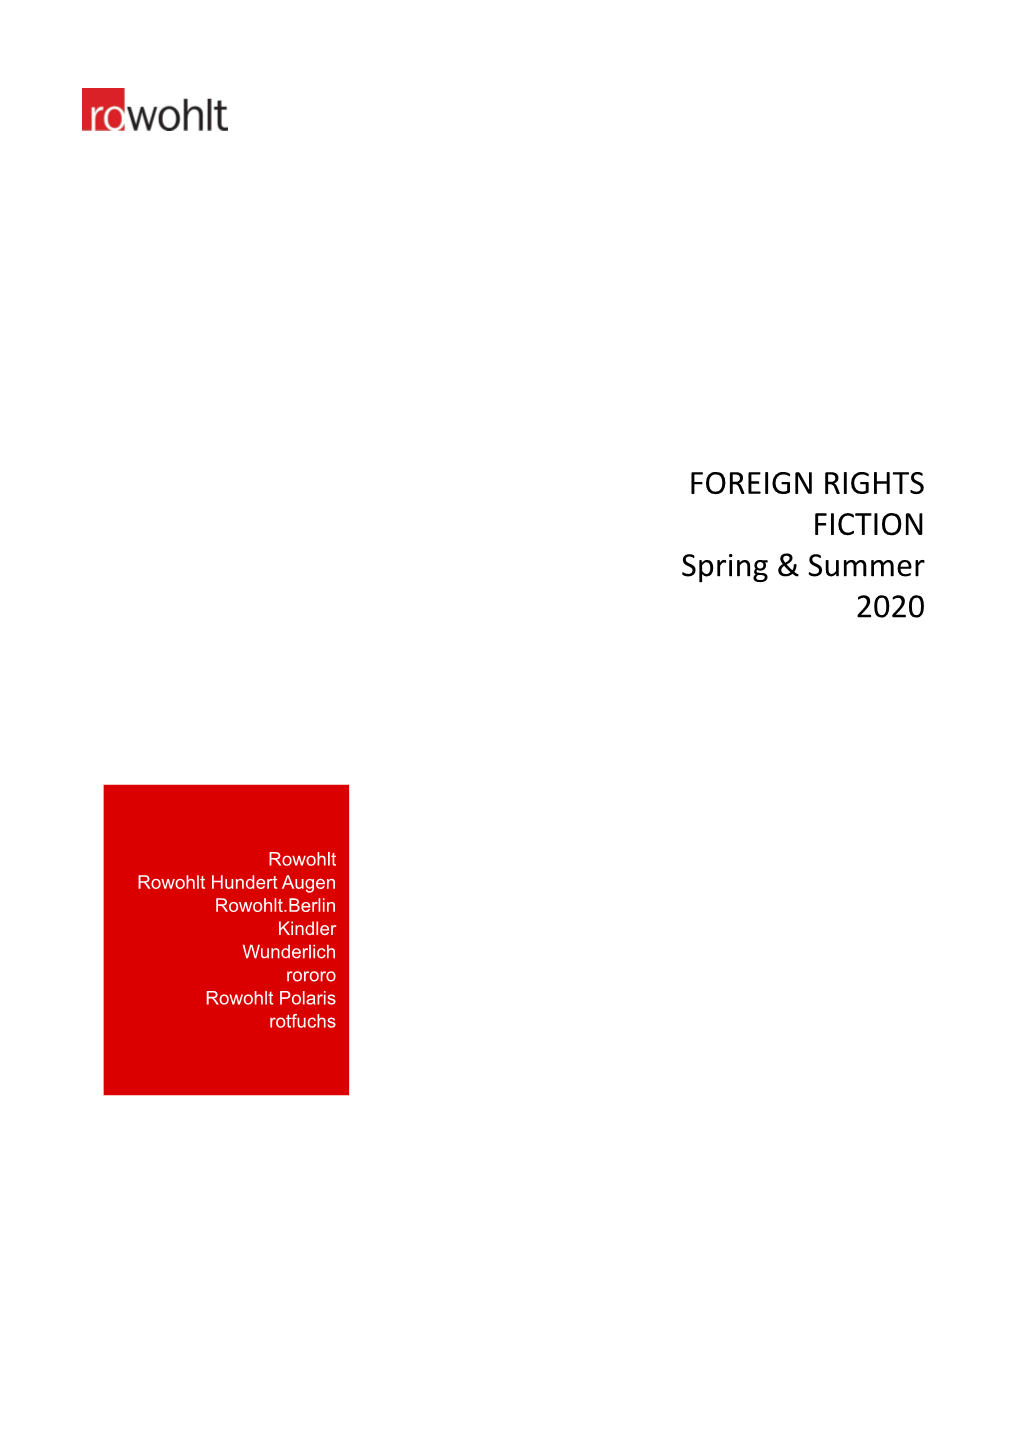 FOREIGN RIGHTS FICTION Spring & Summer 2020